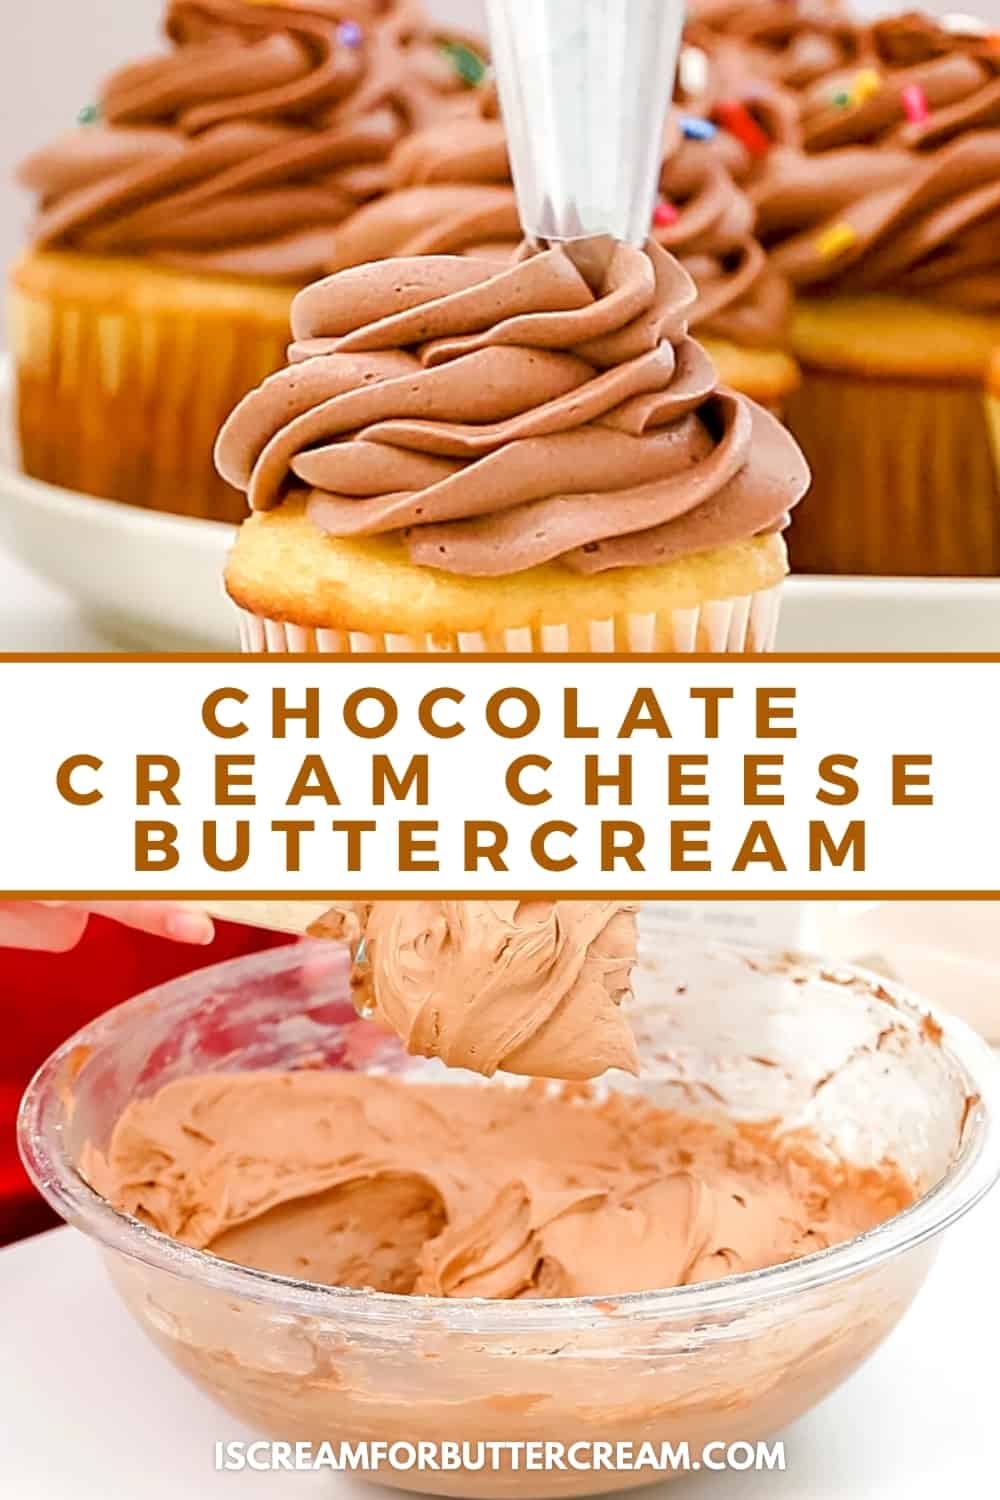 pin of chocolate buttercream on a cupcake